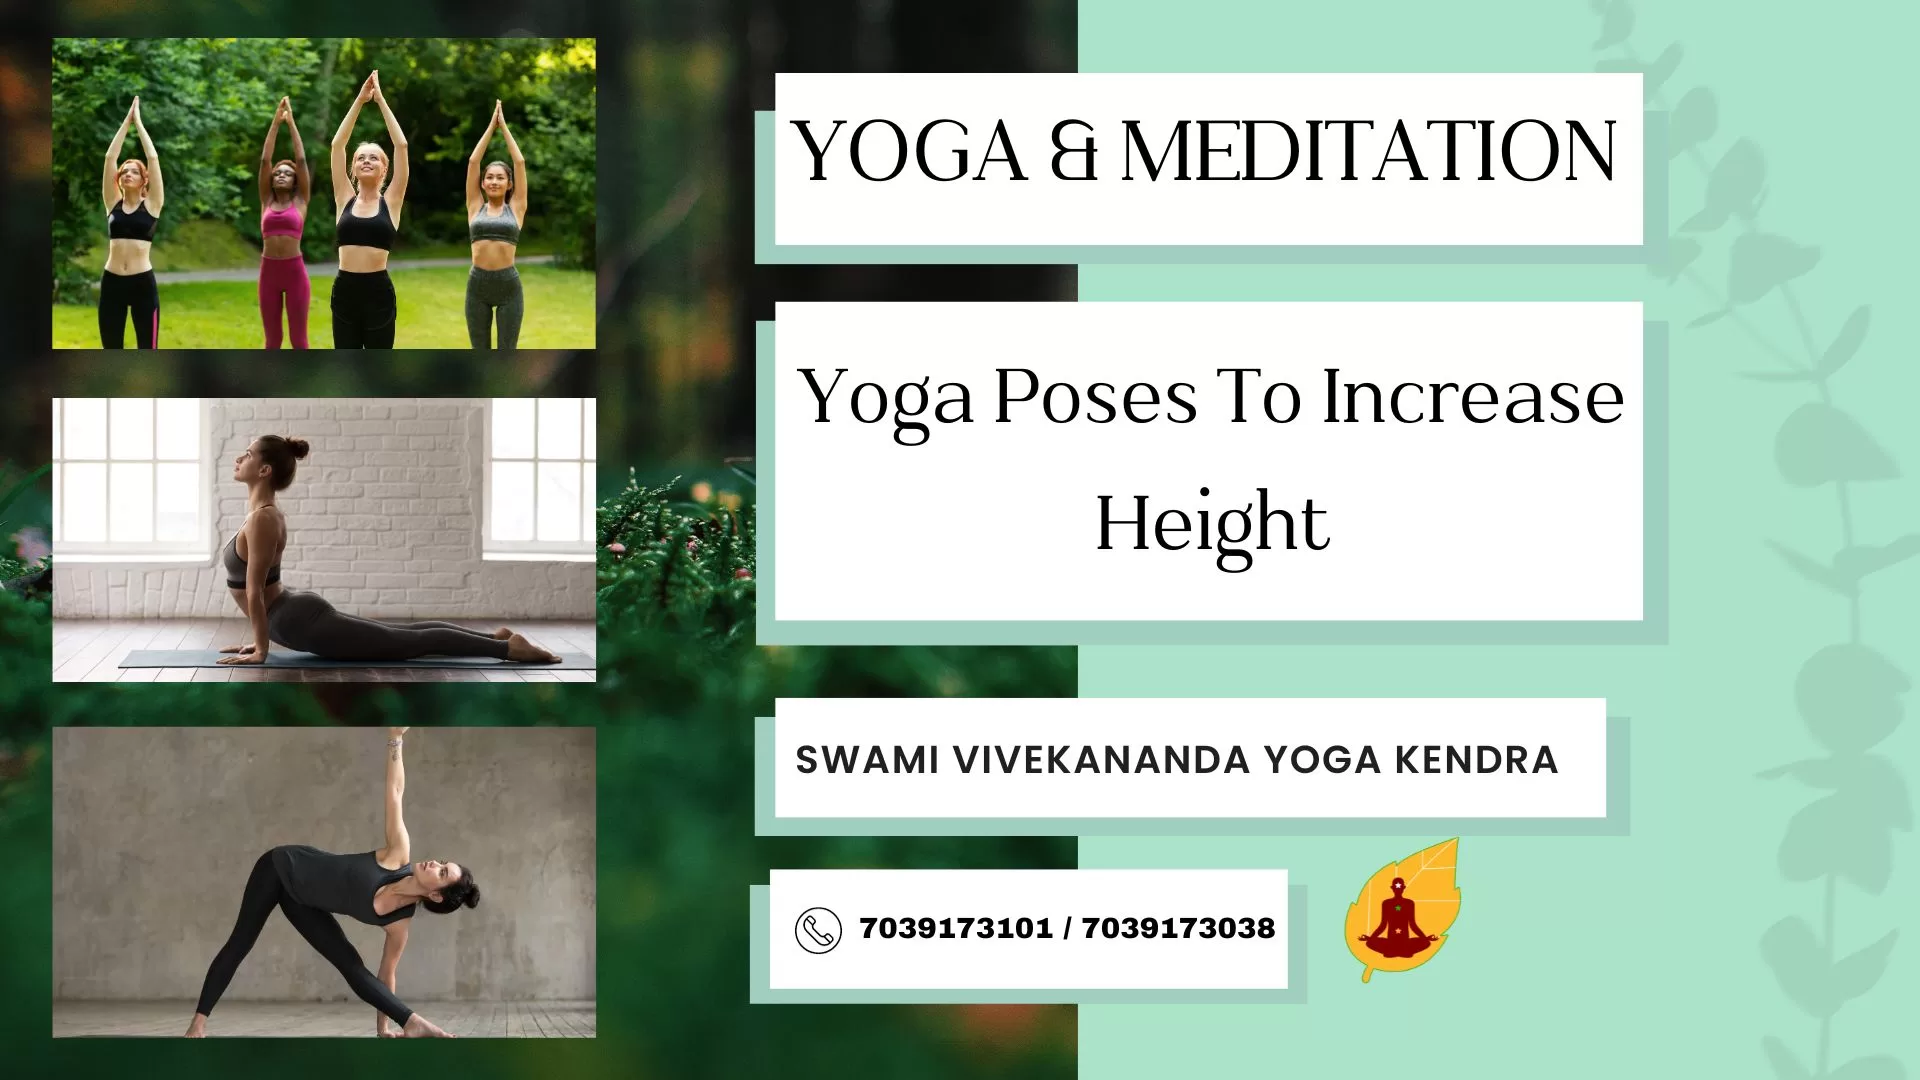 Most effective yoga poses to increase height - YouTube